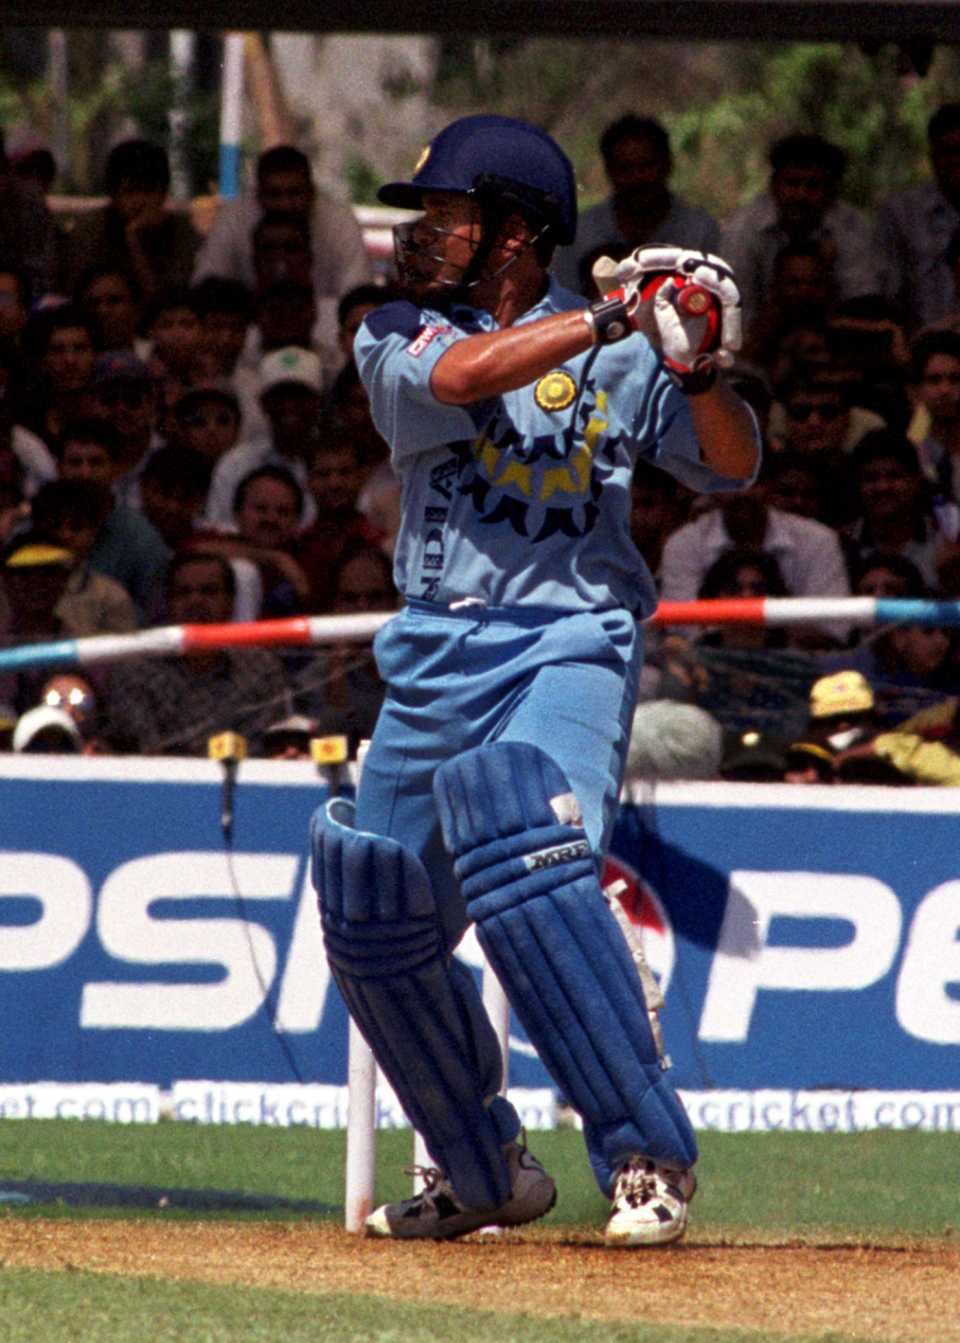 Between 1994 and 2003, Sachin Tendulkar made 11,006 ODI runs at 48.5 while other batsmen in those matches averaged 31.4